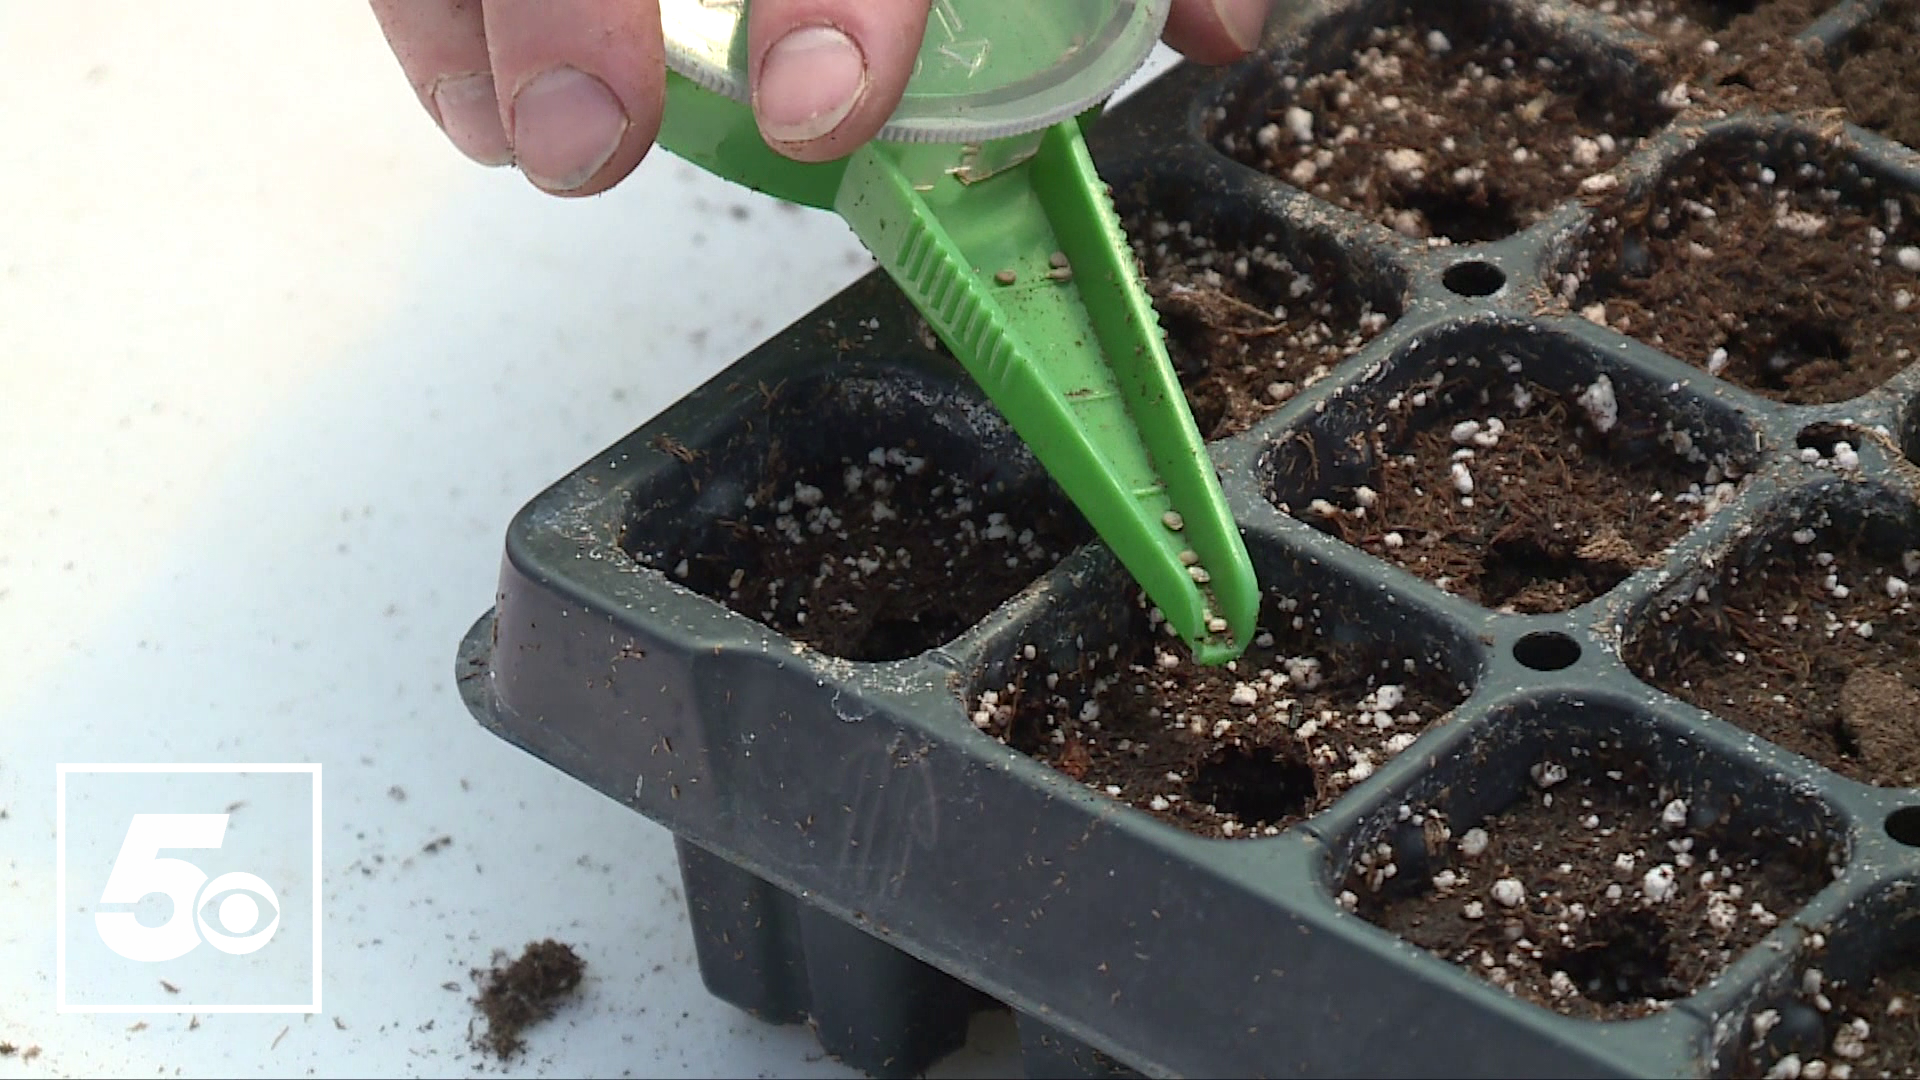 Watch this week's Garden Club segment discussing how to start a garden, beginning with the seeding process.